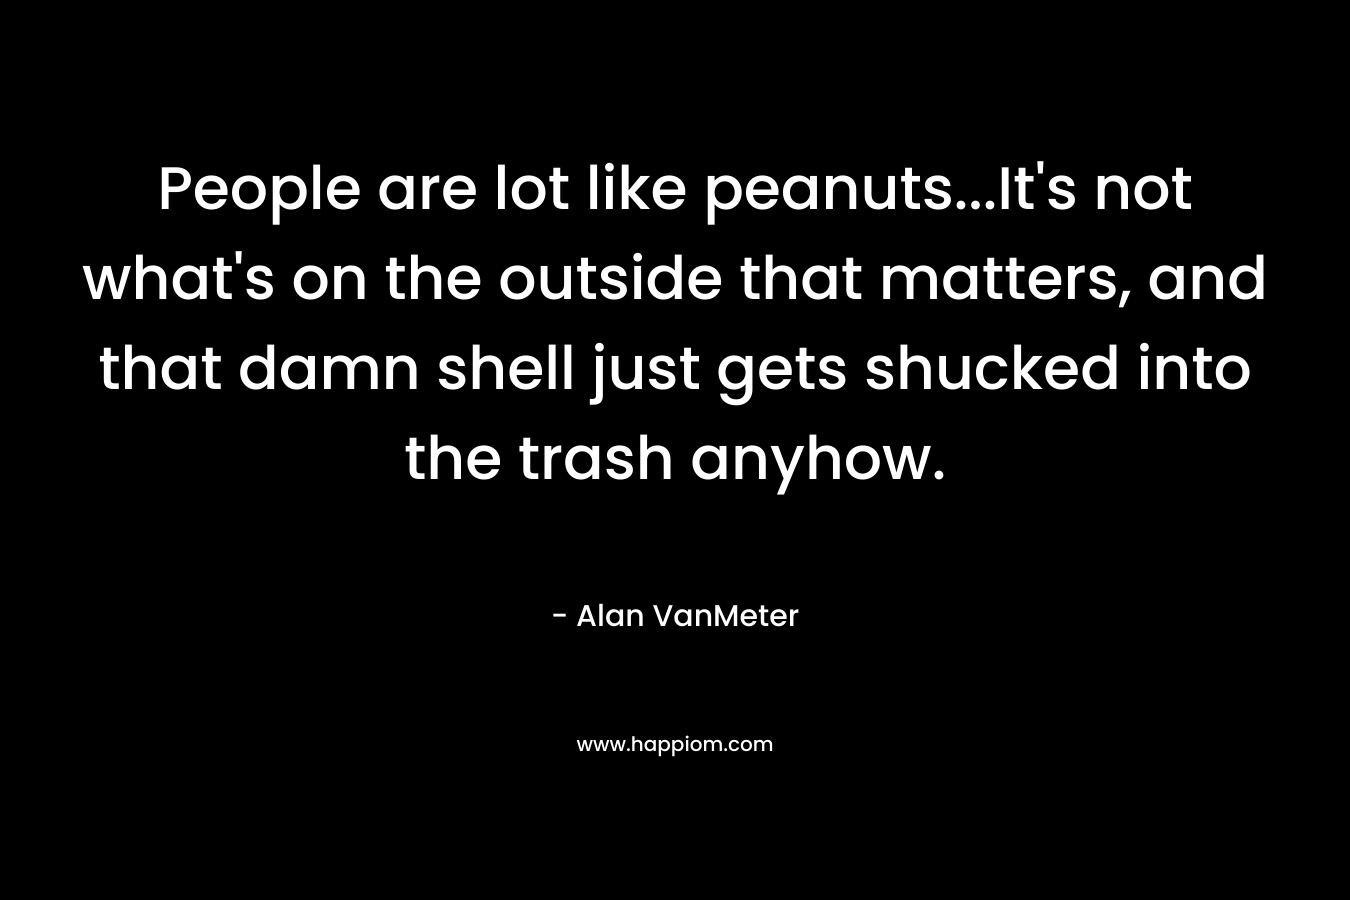 People are lot like peanuts…It’s not what’s on the outside that matters, and that damn shell just gets shucked into the trash anyhow. – Alan VanMeter